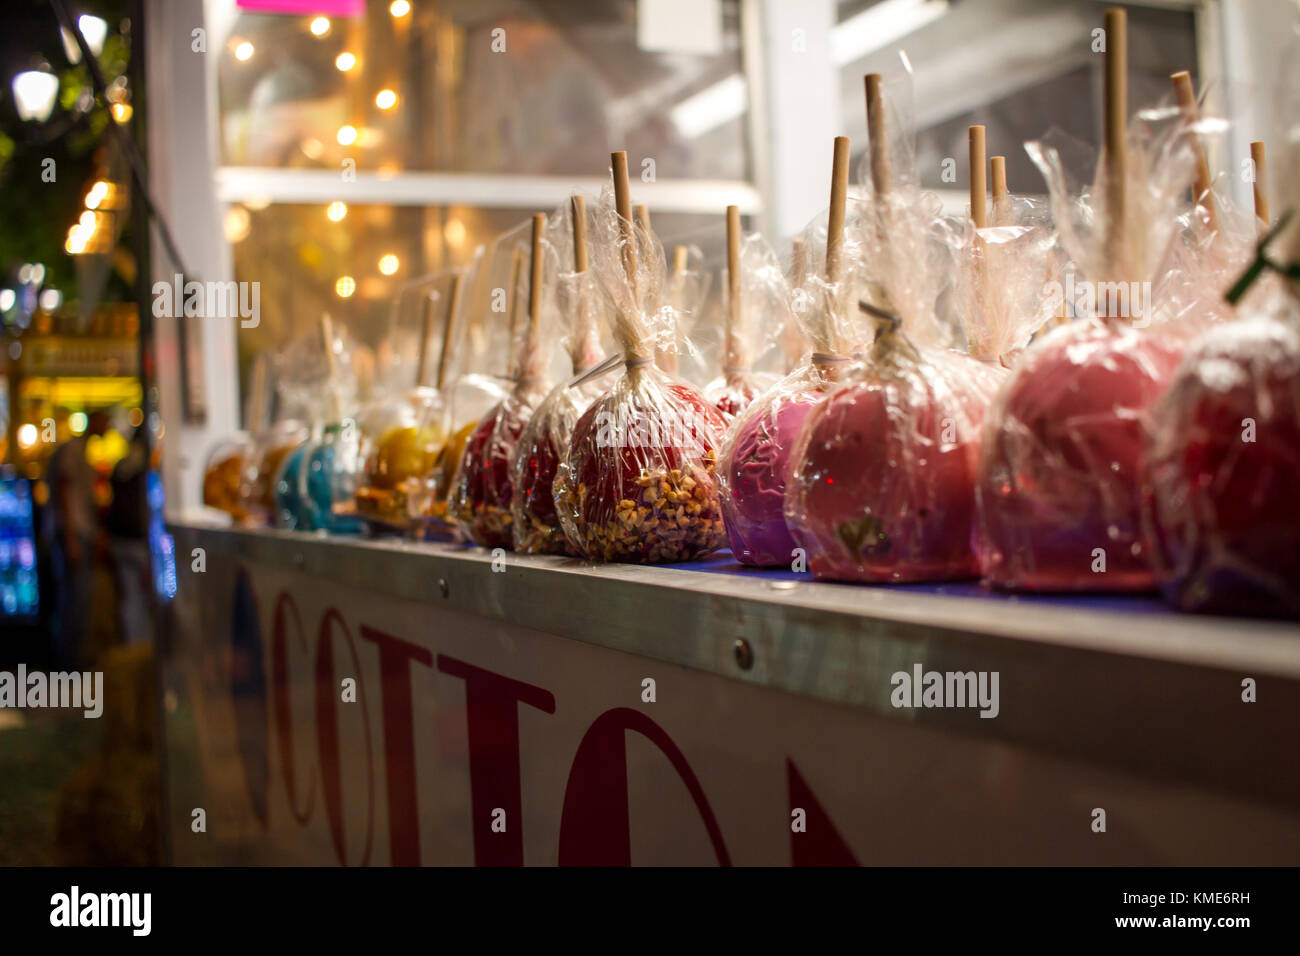 Candy apples for sale Stock Photo